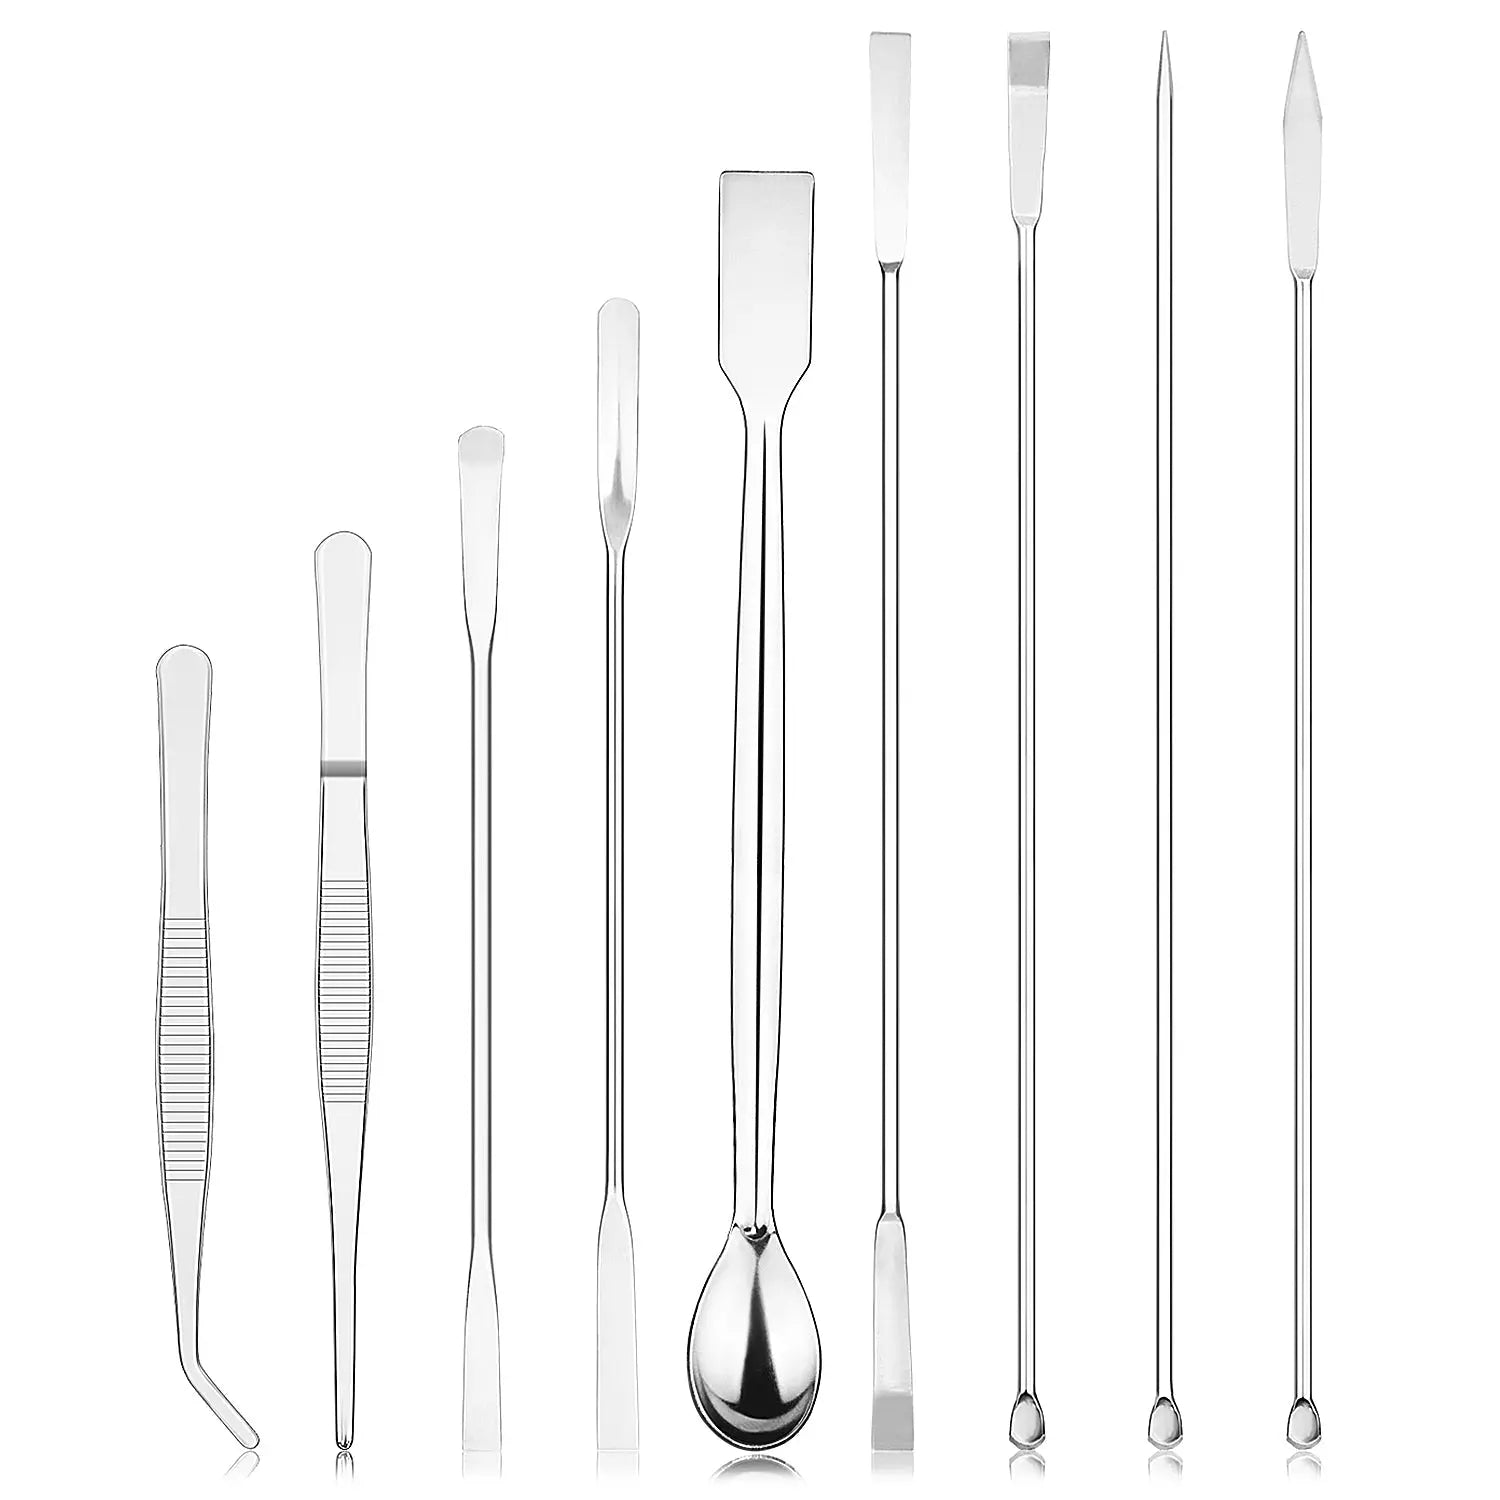 Fisherbrand Micro Spatulas Set of 8 Set of 8:Specialty Lab